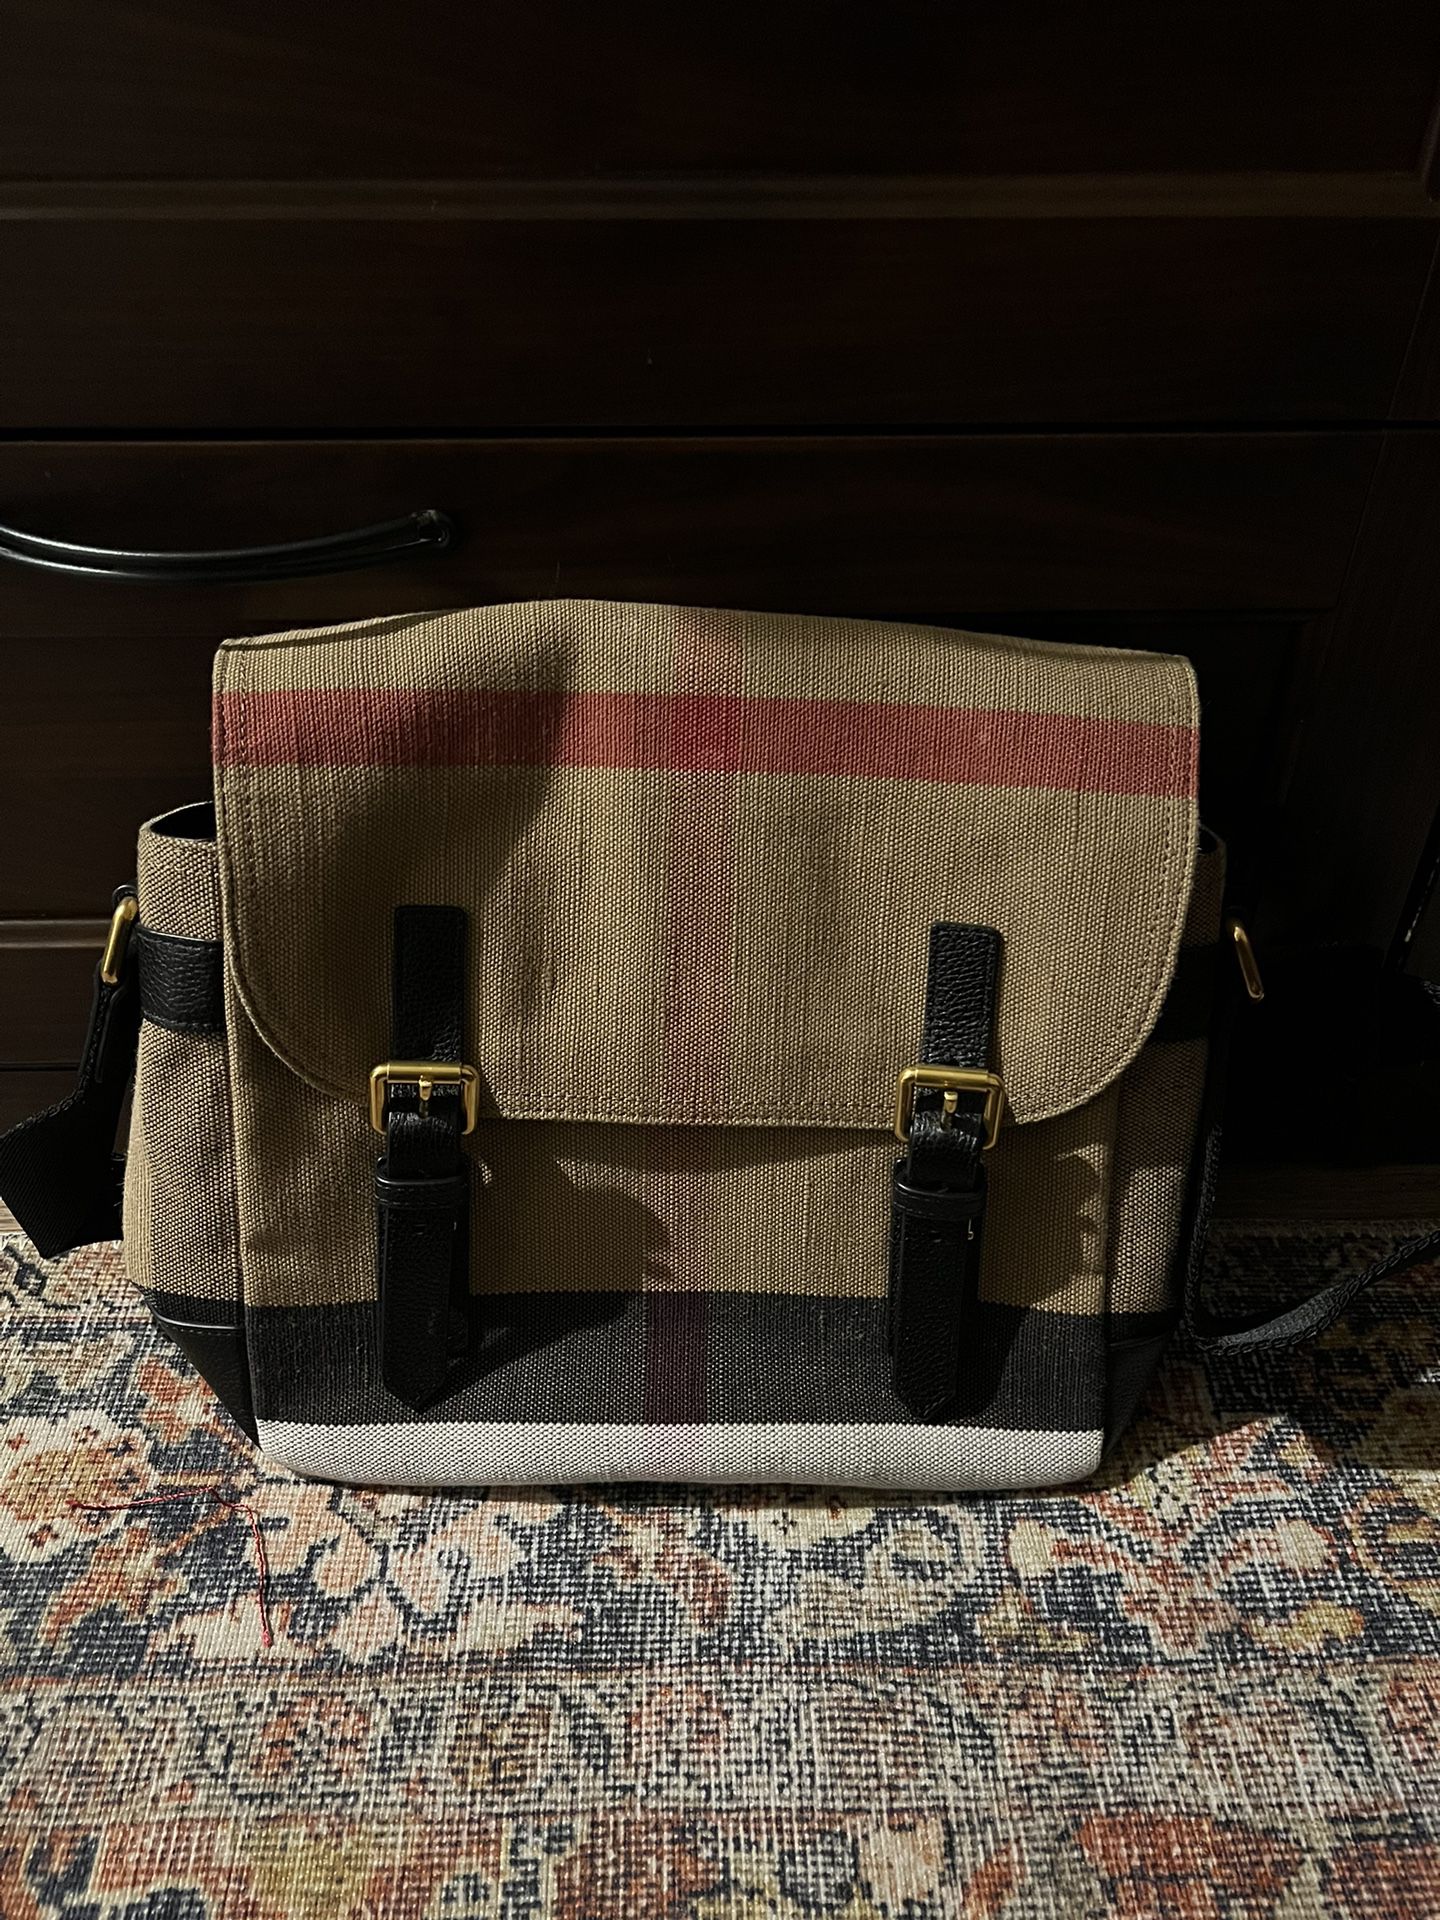 Burberry Canvas Mega Check Large Baildon Messenger Bag. Comes With Tag And Dust Bag. Retails $750, Selling For $500. Perfect Condition